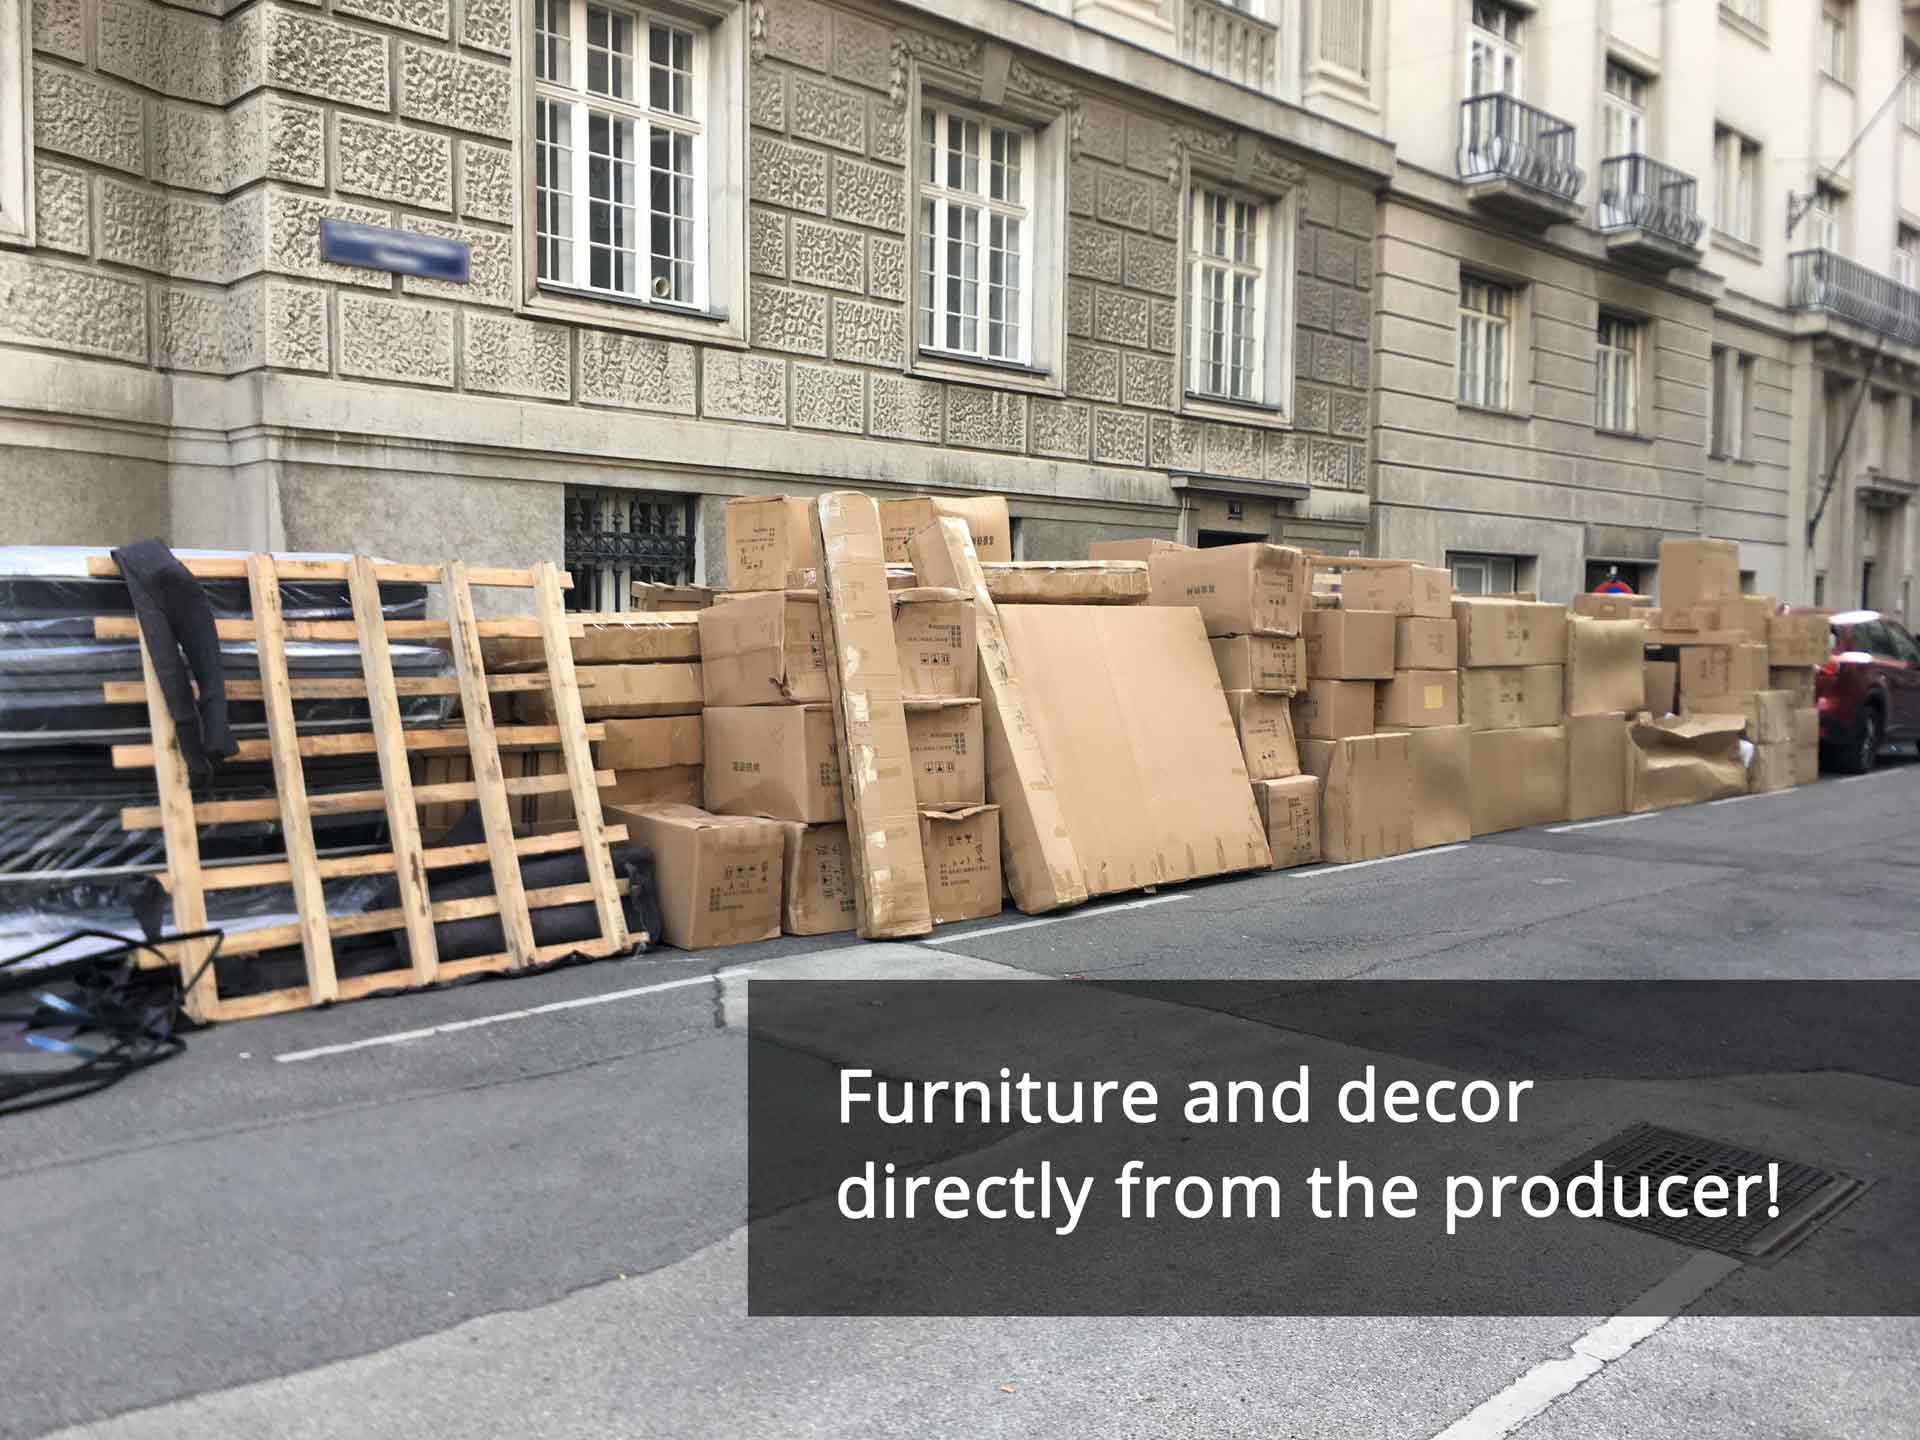 Furniture and decor directly from the producer